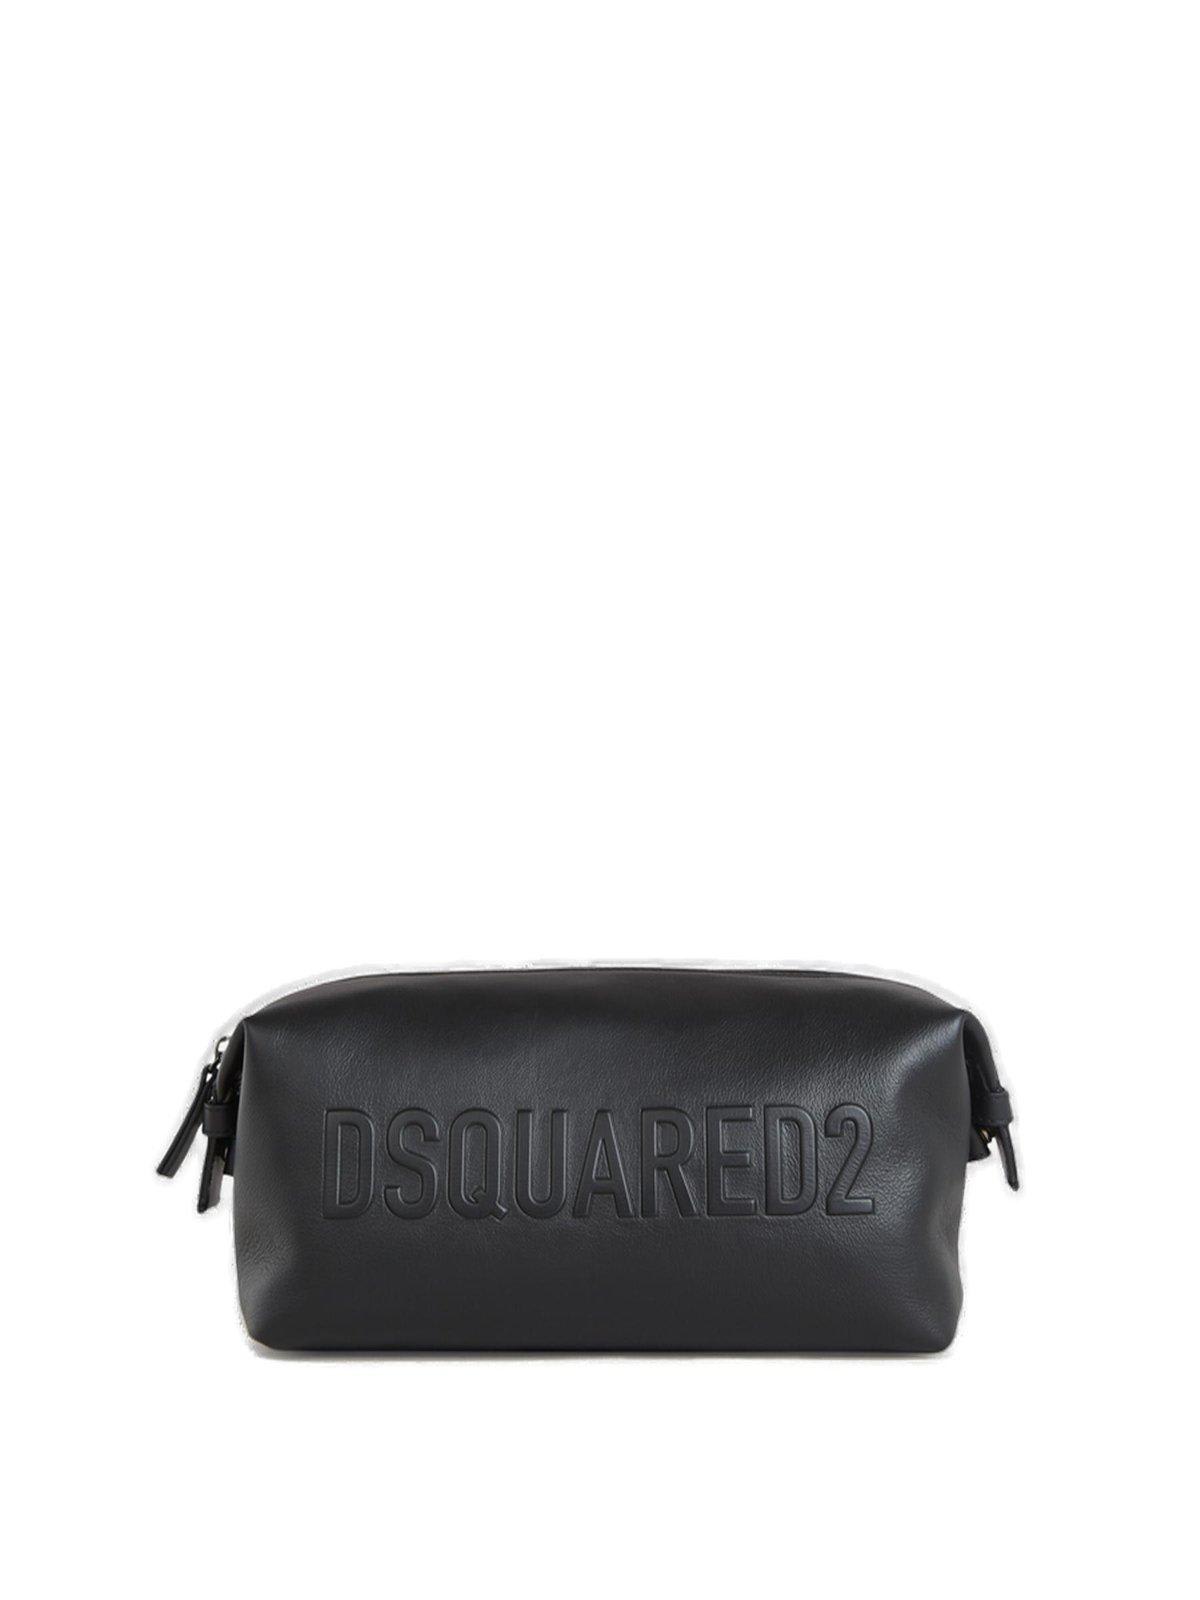 Dsquared2 Logo Embossed Zipped Toiletry Bag